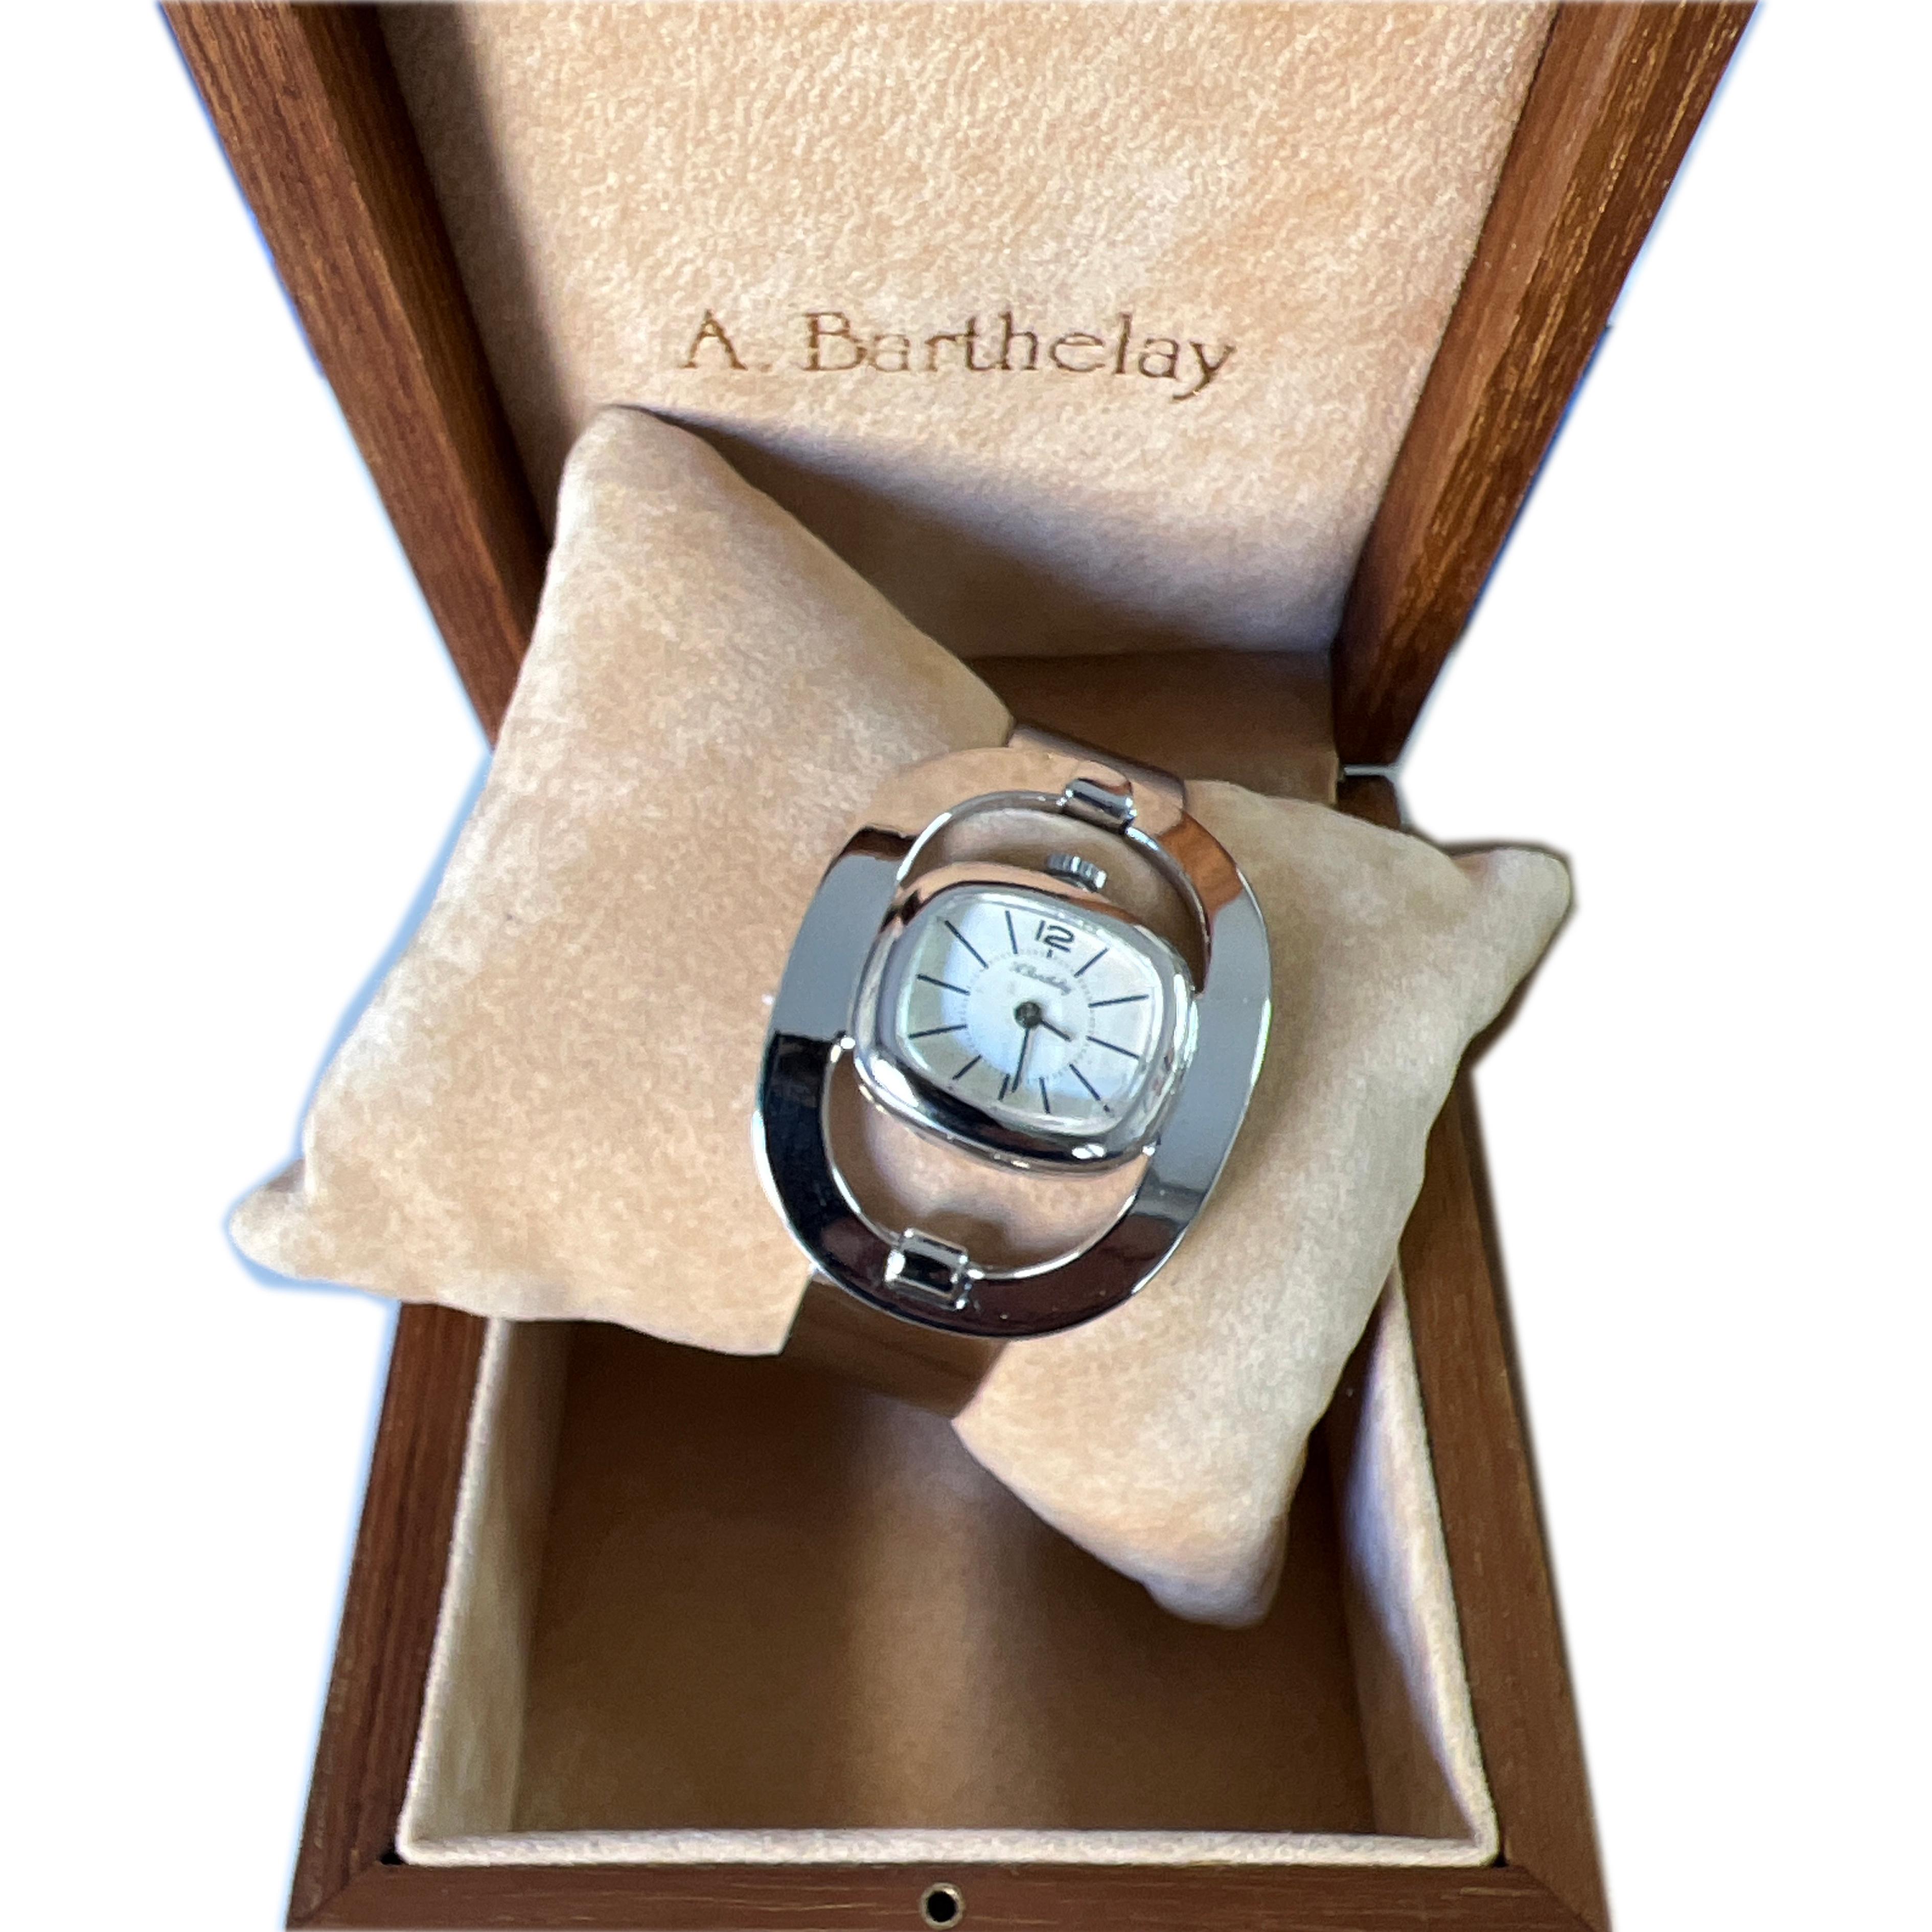 Original 1969 Alexis Barthelay Hand-Wound Movement Sterling Silver Watch 4